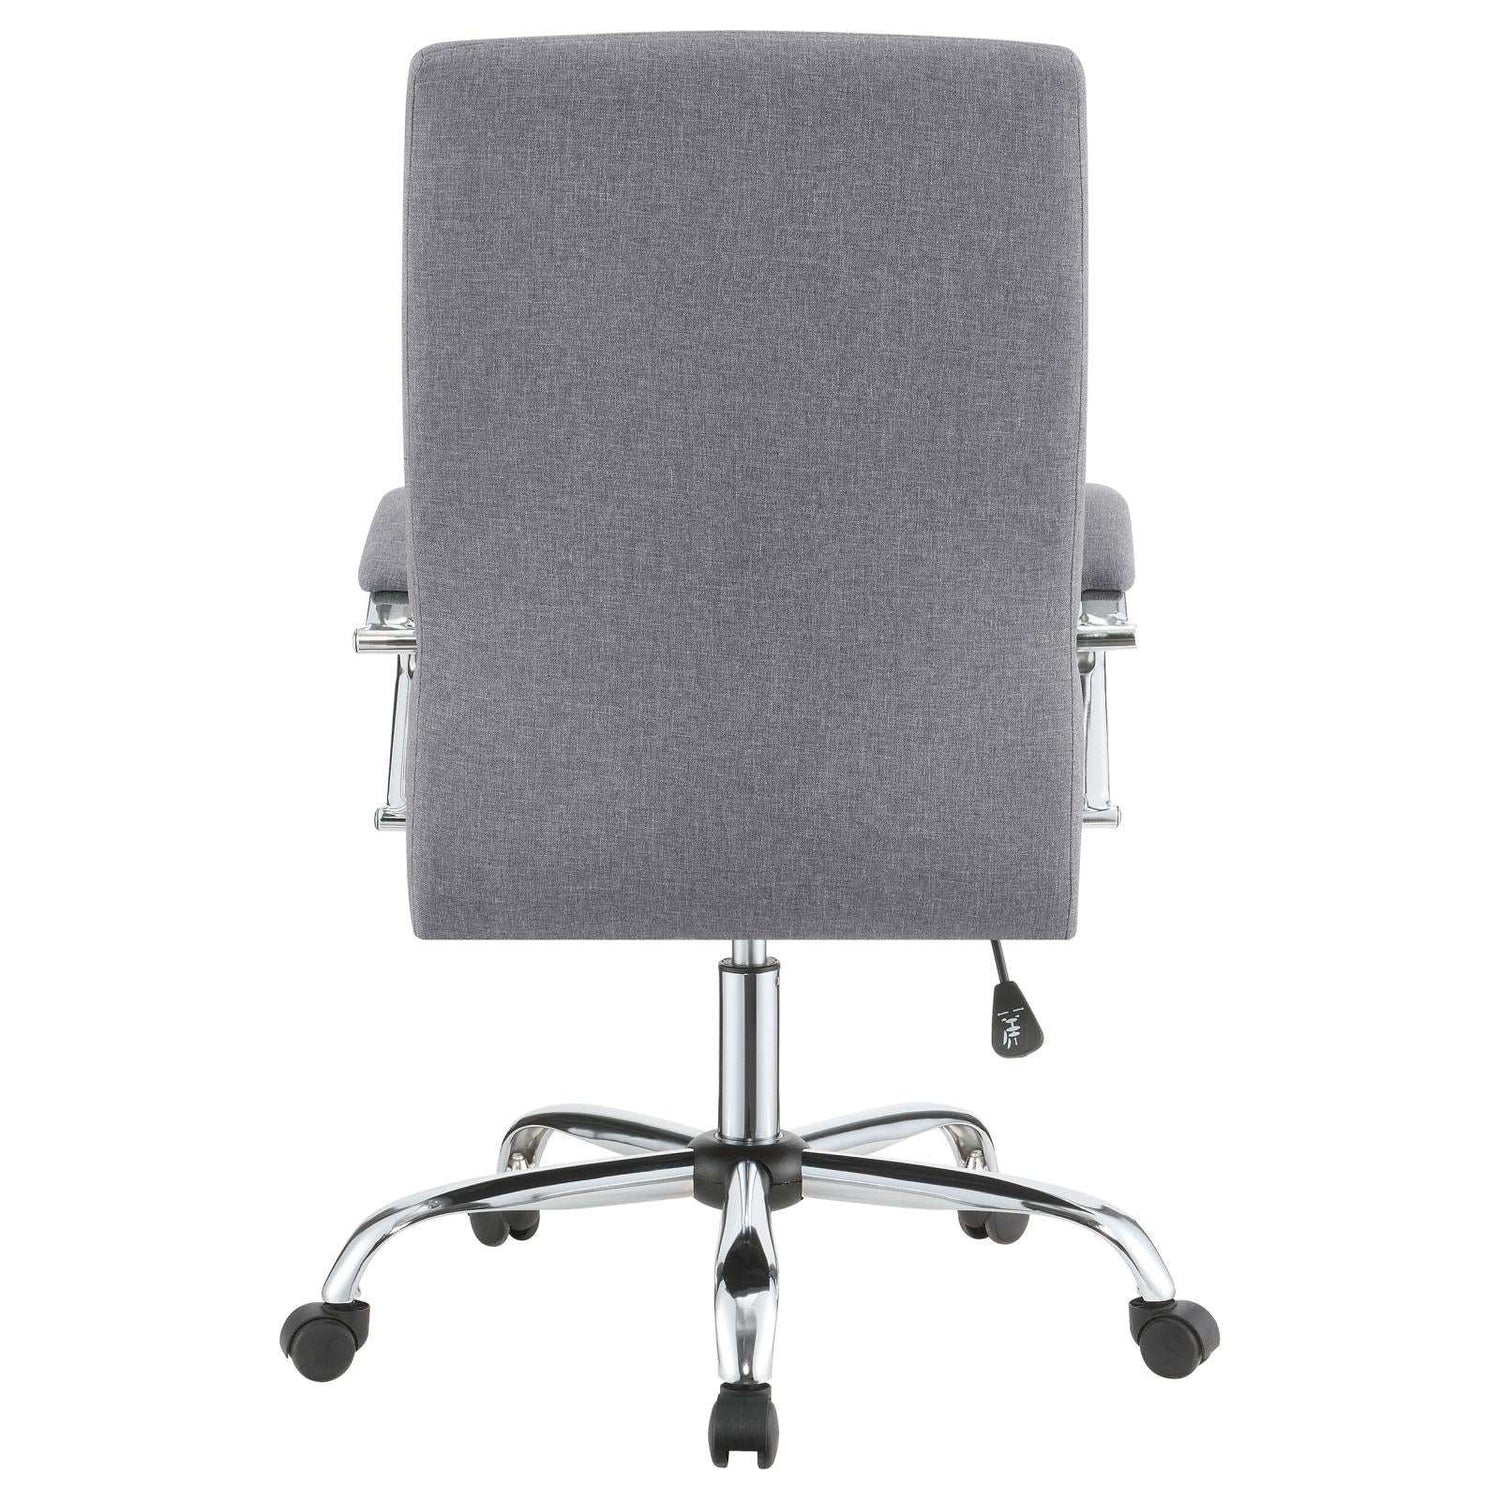 Abisko Gray/Chrome Upholstered Office Chair with Casters - 881217 - Bien Home Furniture &amp; Electronics